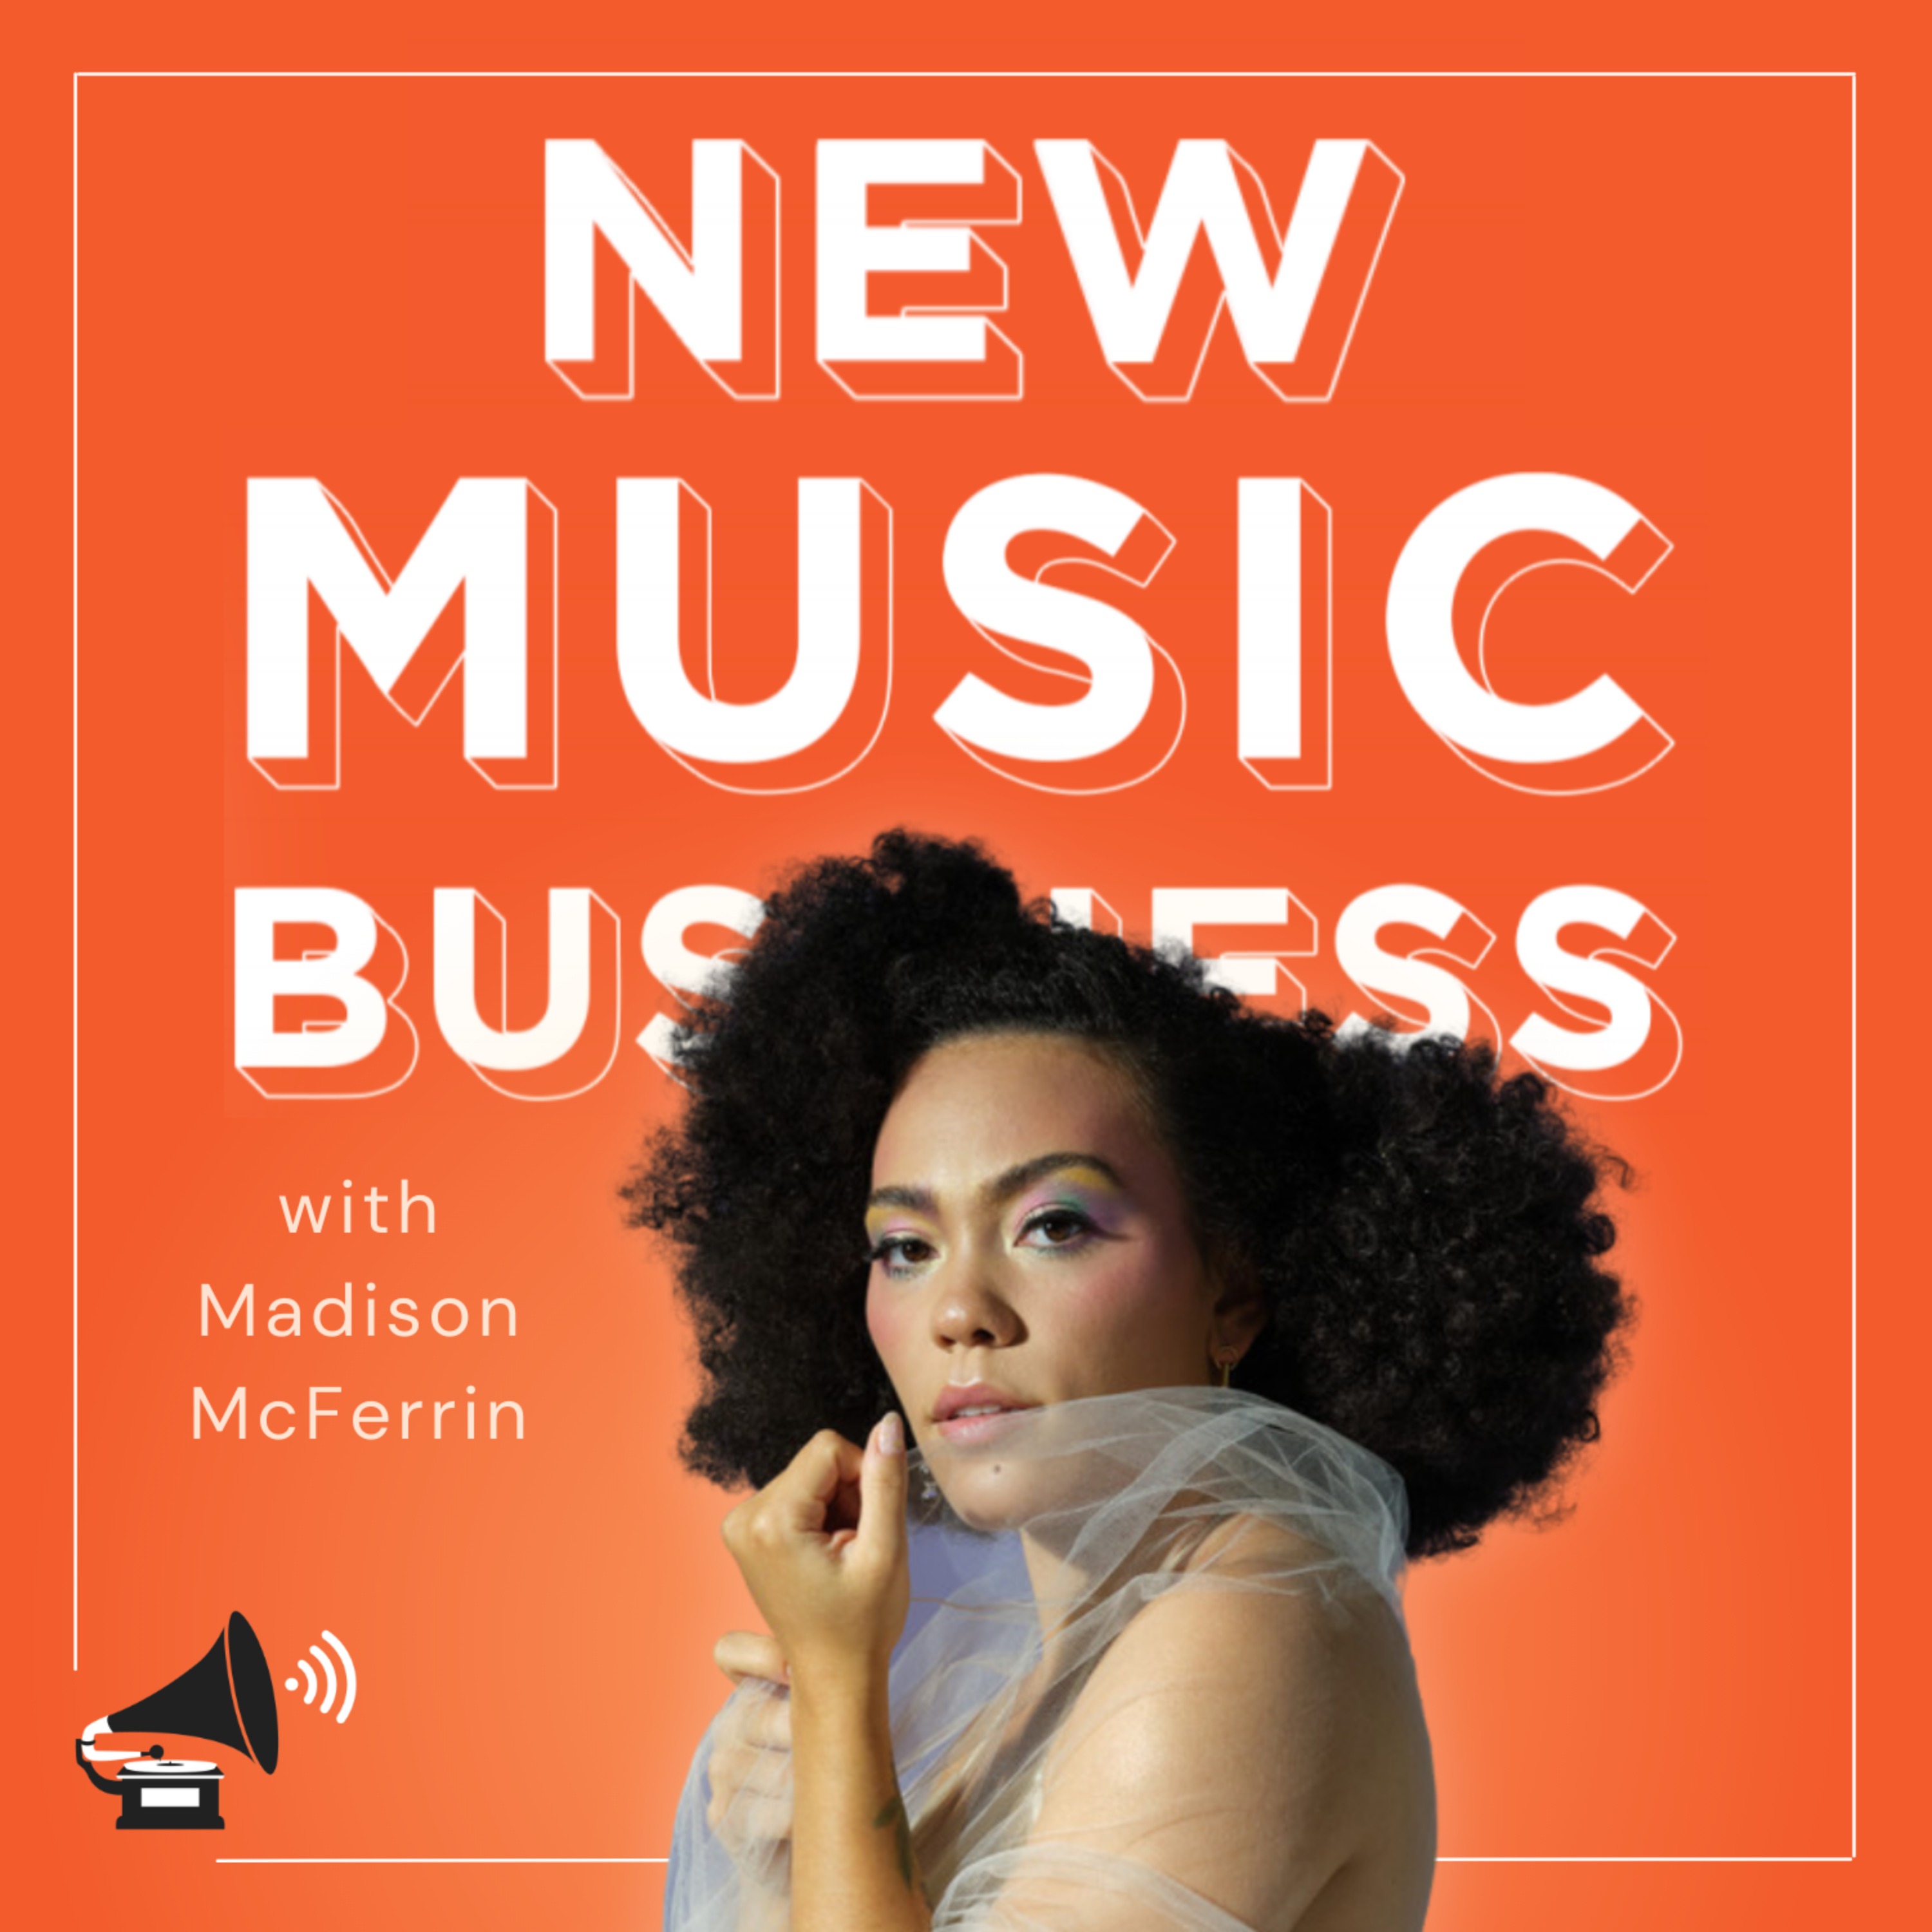 Madison McFerrin Stays "Fiercely Independent" With Her Nontraditional Team